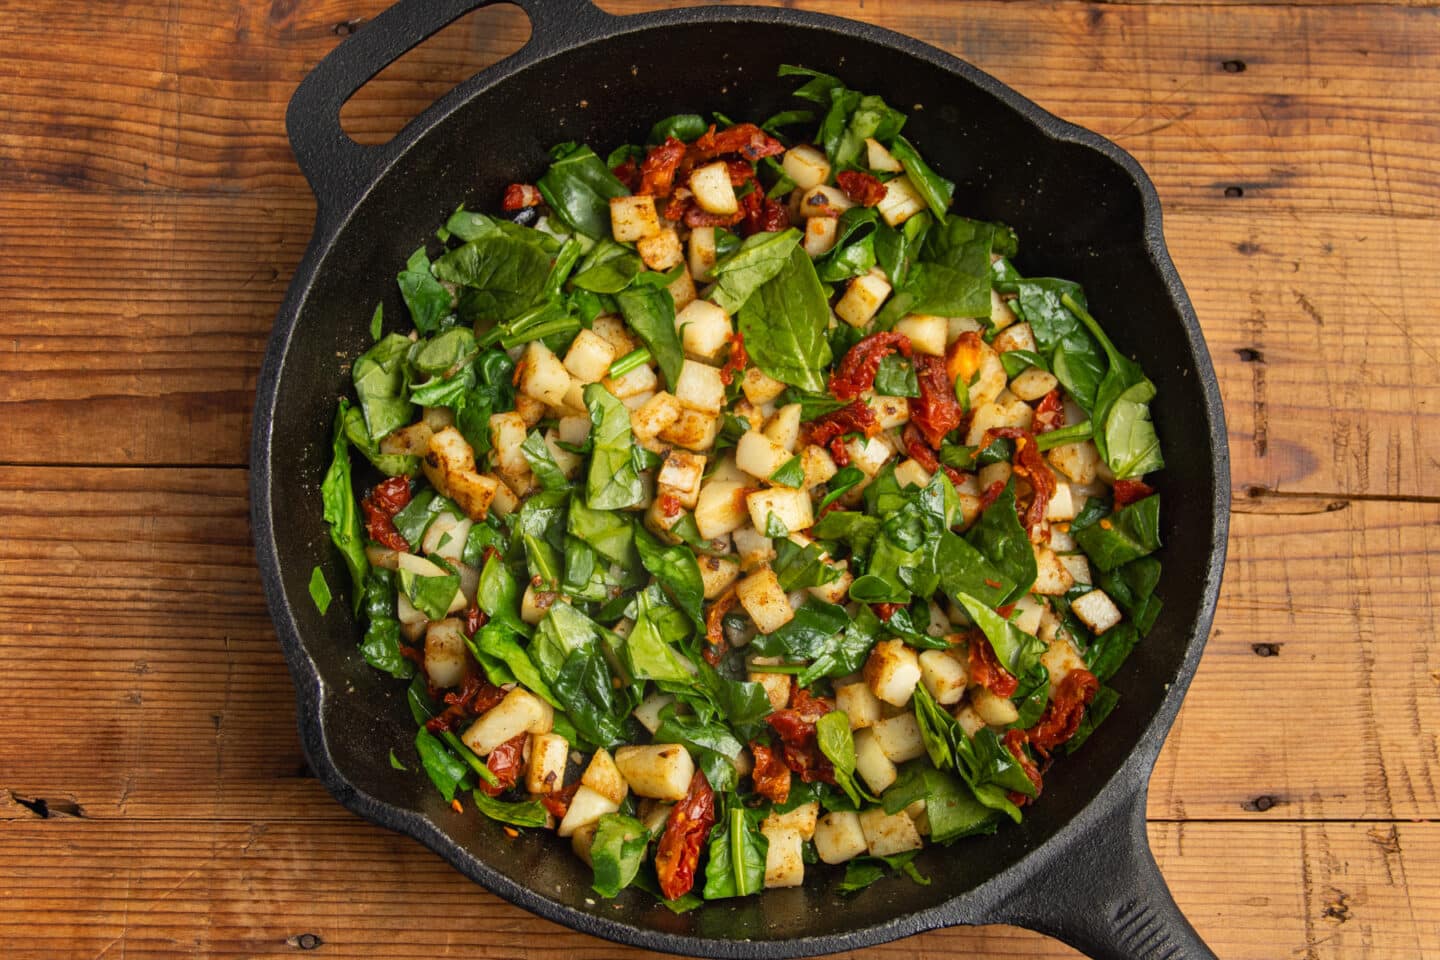 This is a picture of the skillet with added spinach and sun-dried tomatoes mixed in.